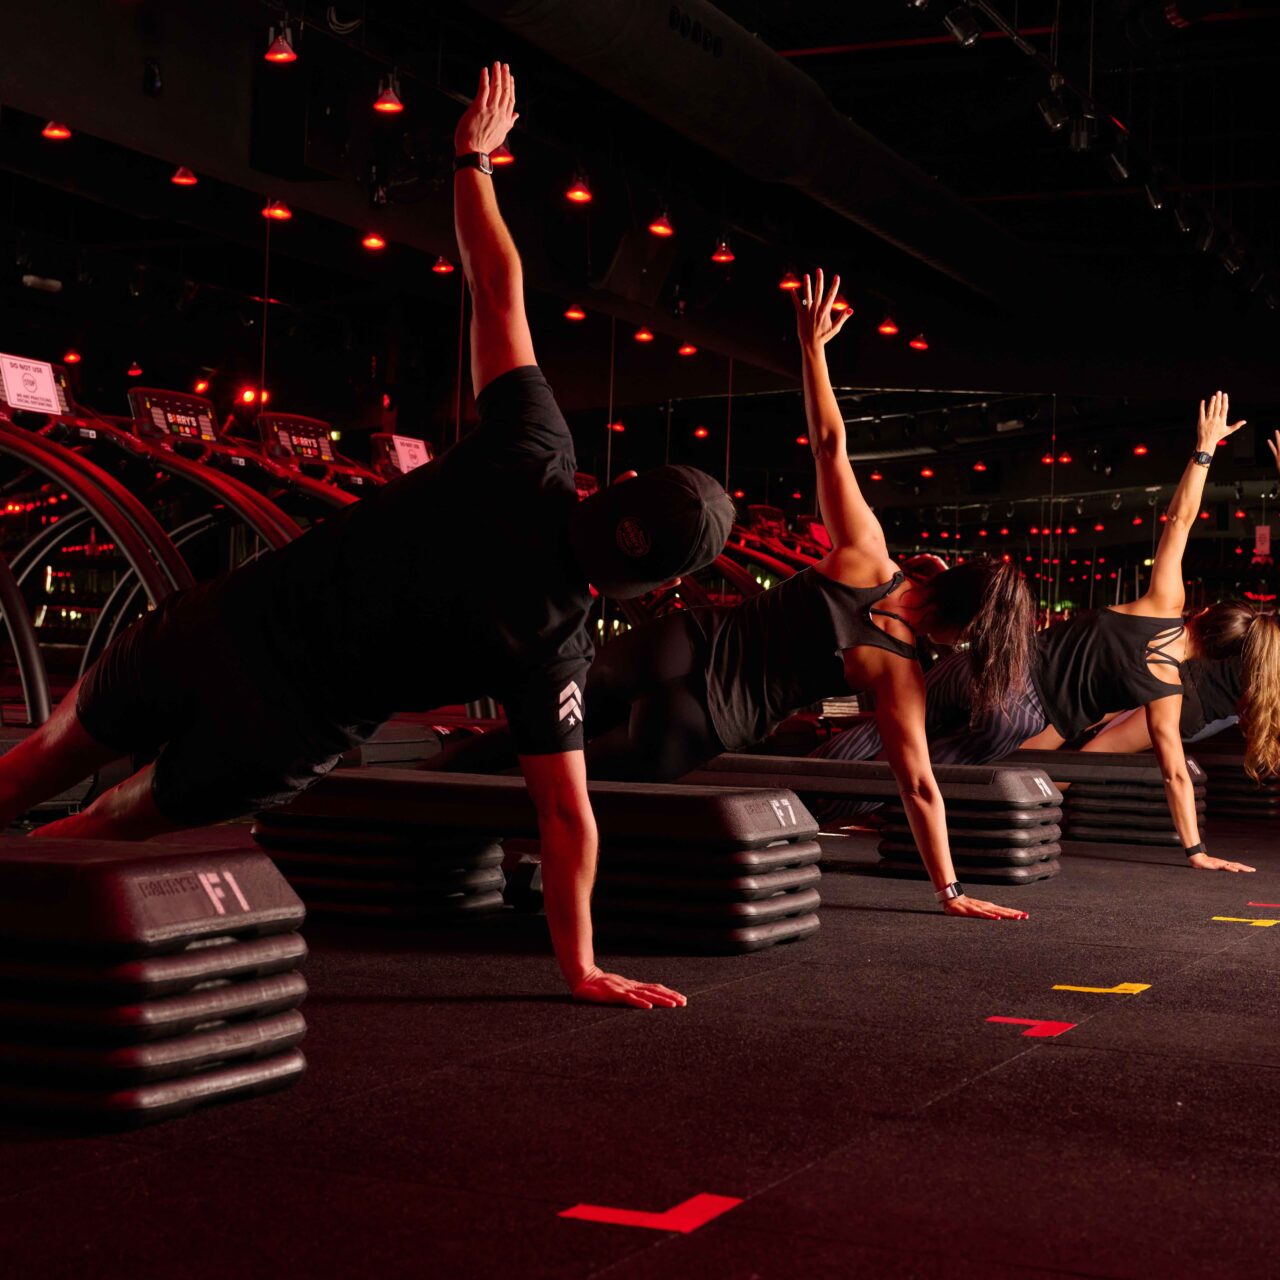 Barry’s Bootcamp is for beginners, too